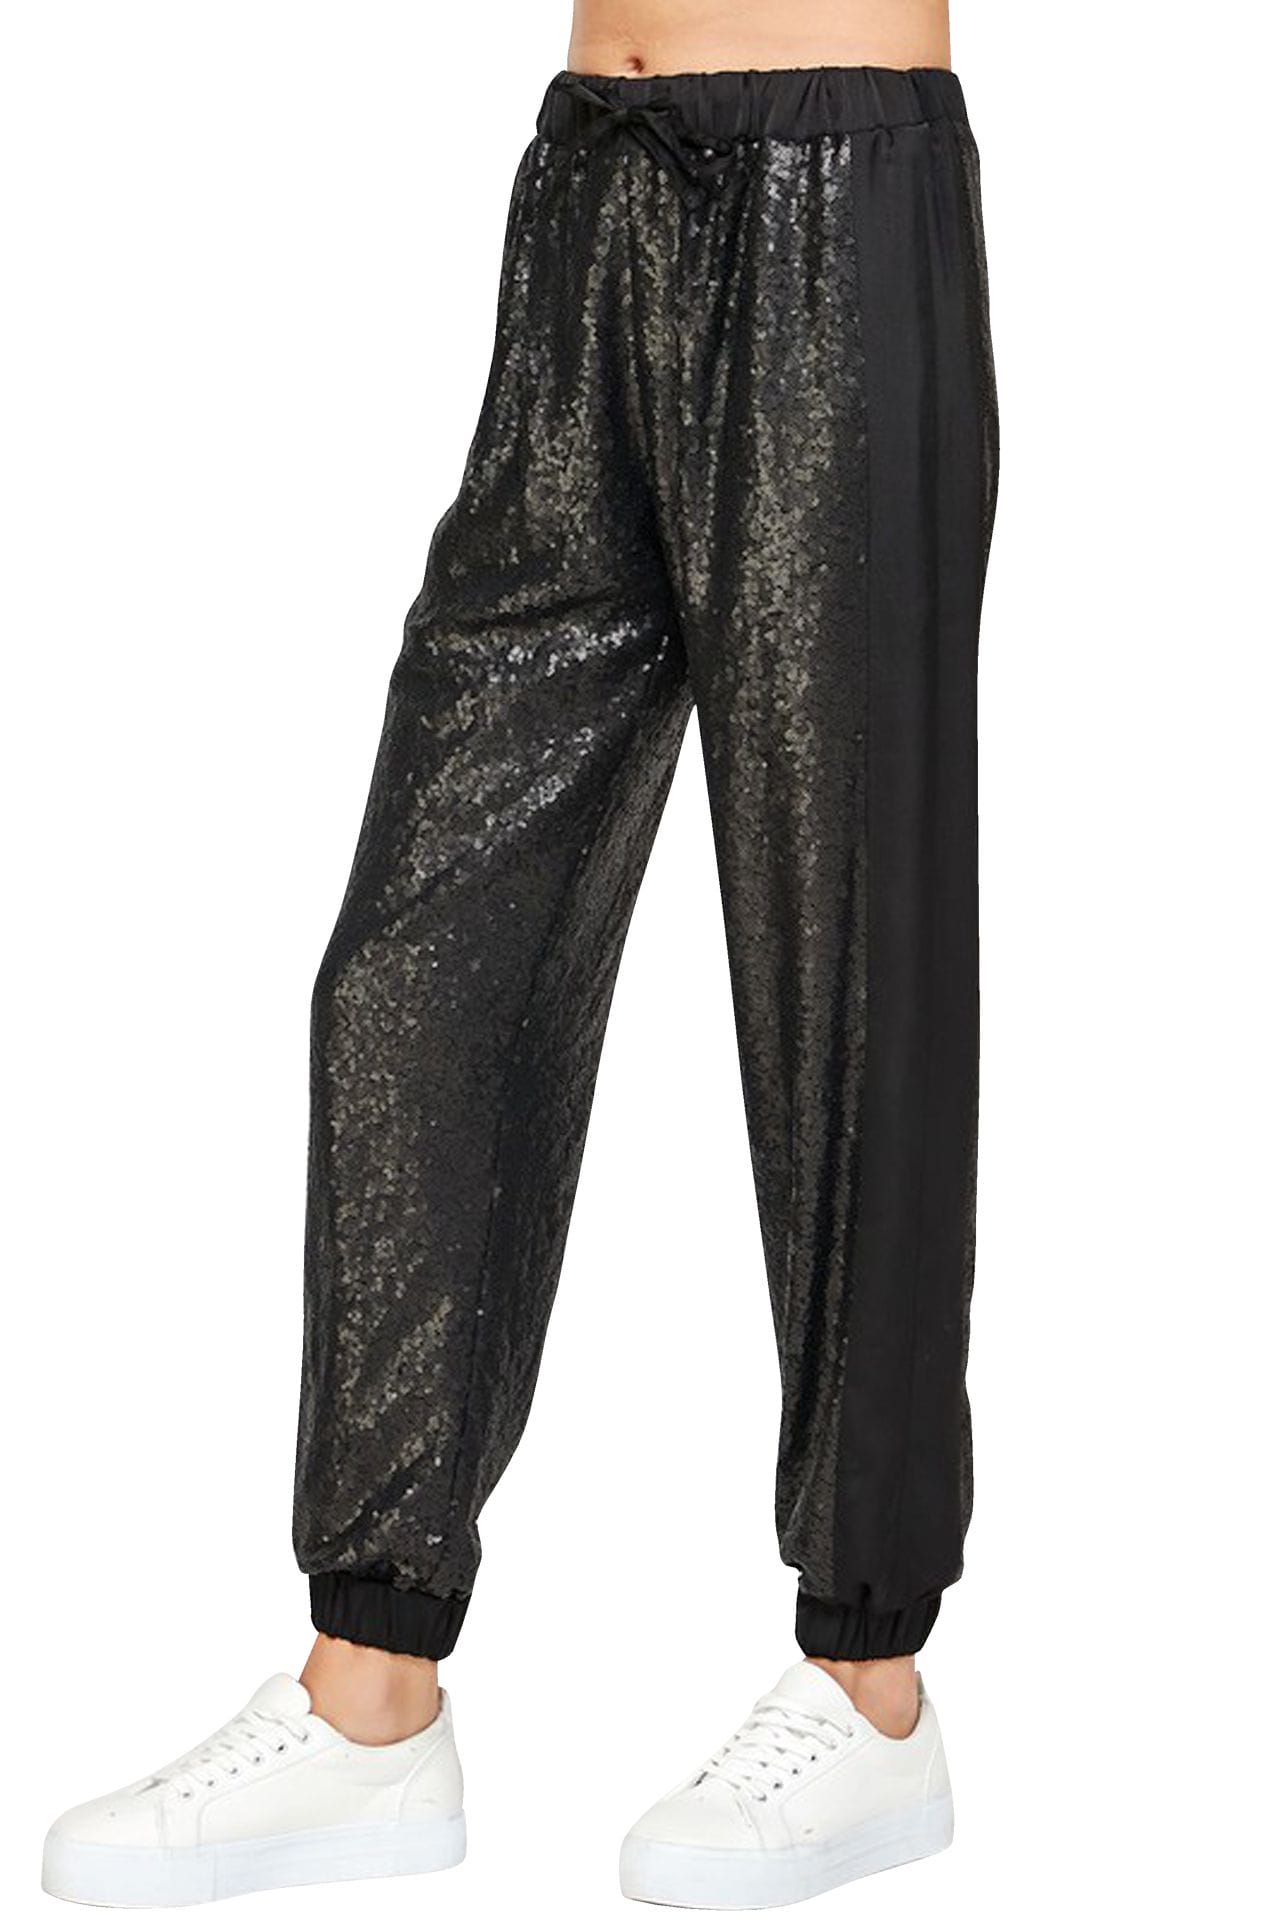 Designer Joggers With Sequins, Sequin Joggers Black